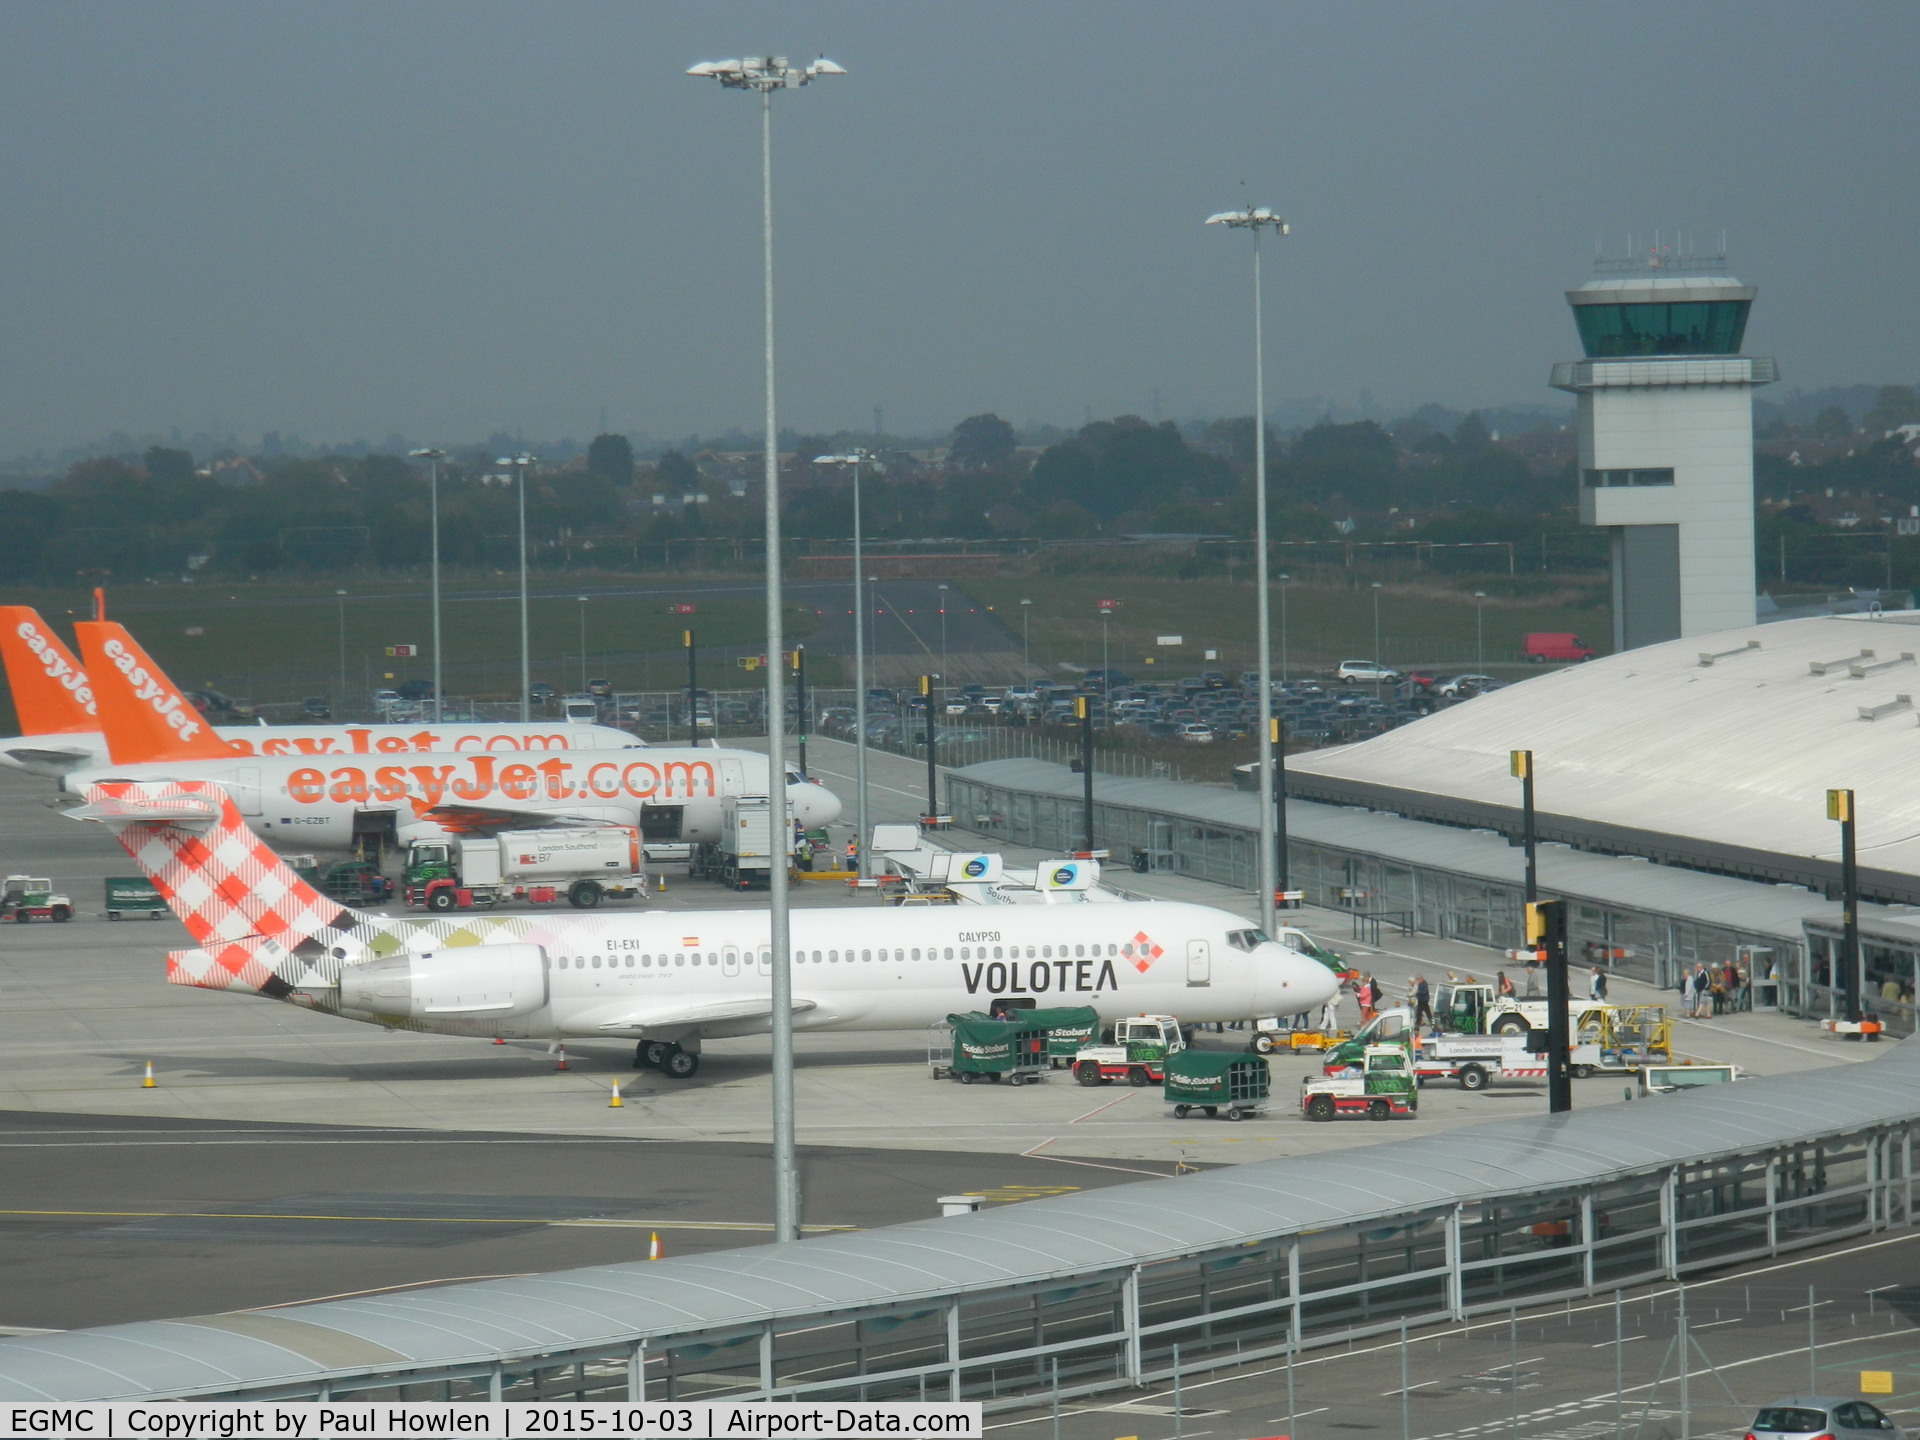 London Southend Airport, Southend-on-Sea, England United Kingdom (EGMC) - Taken from Holiday Inn on a Saturday afternoon, October 2015